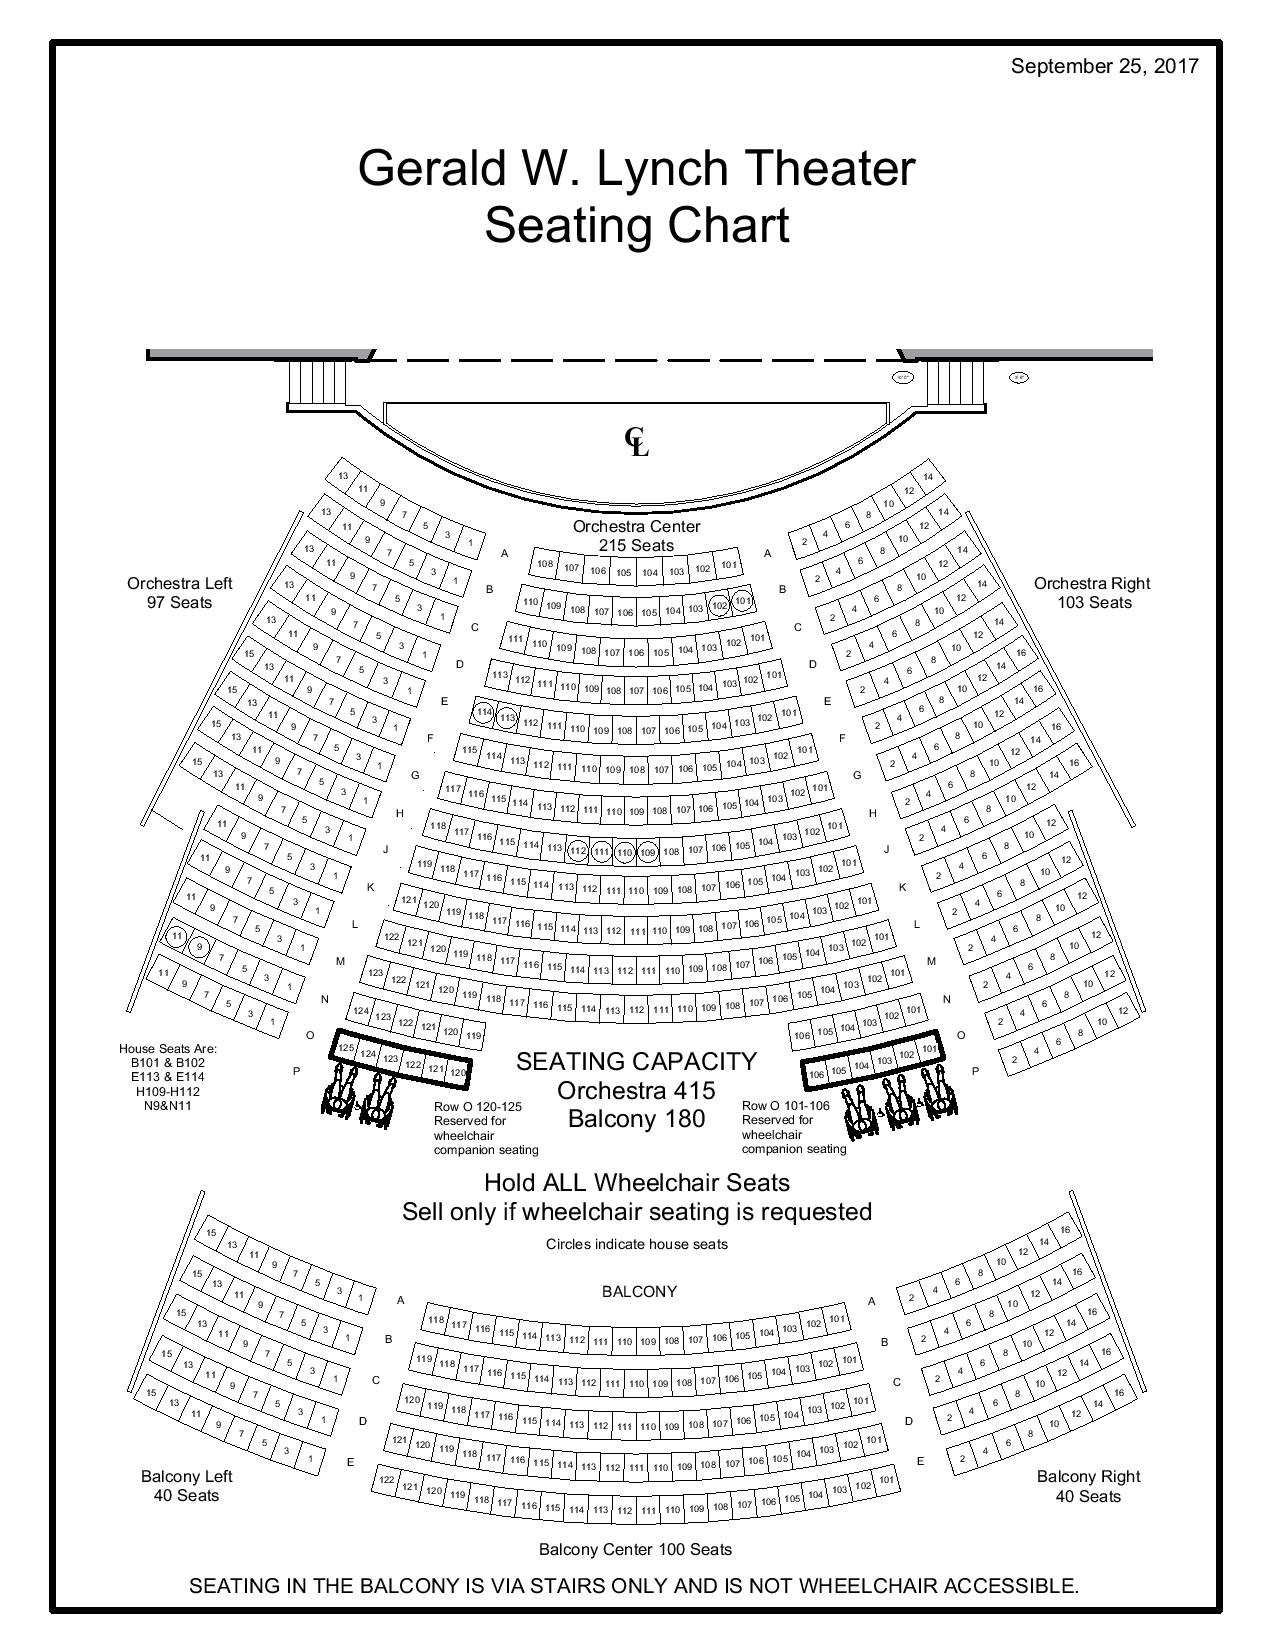 GWL-Theater-Seating-Chart-5.31